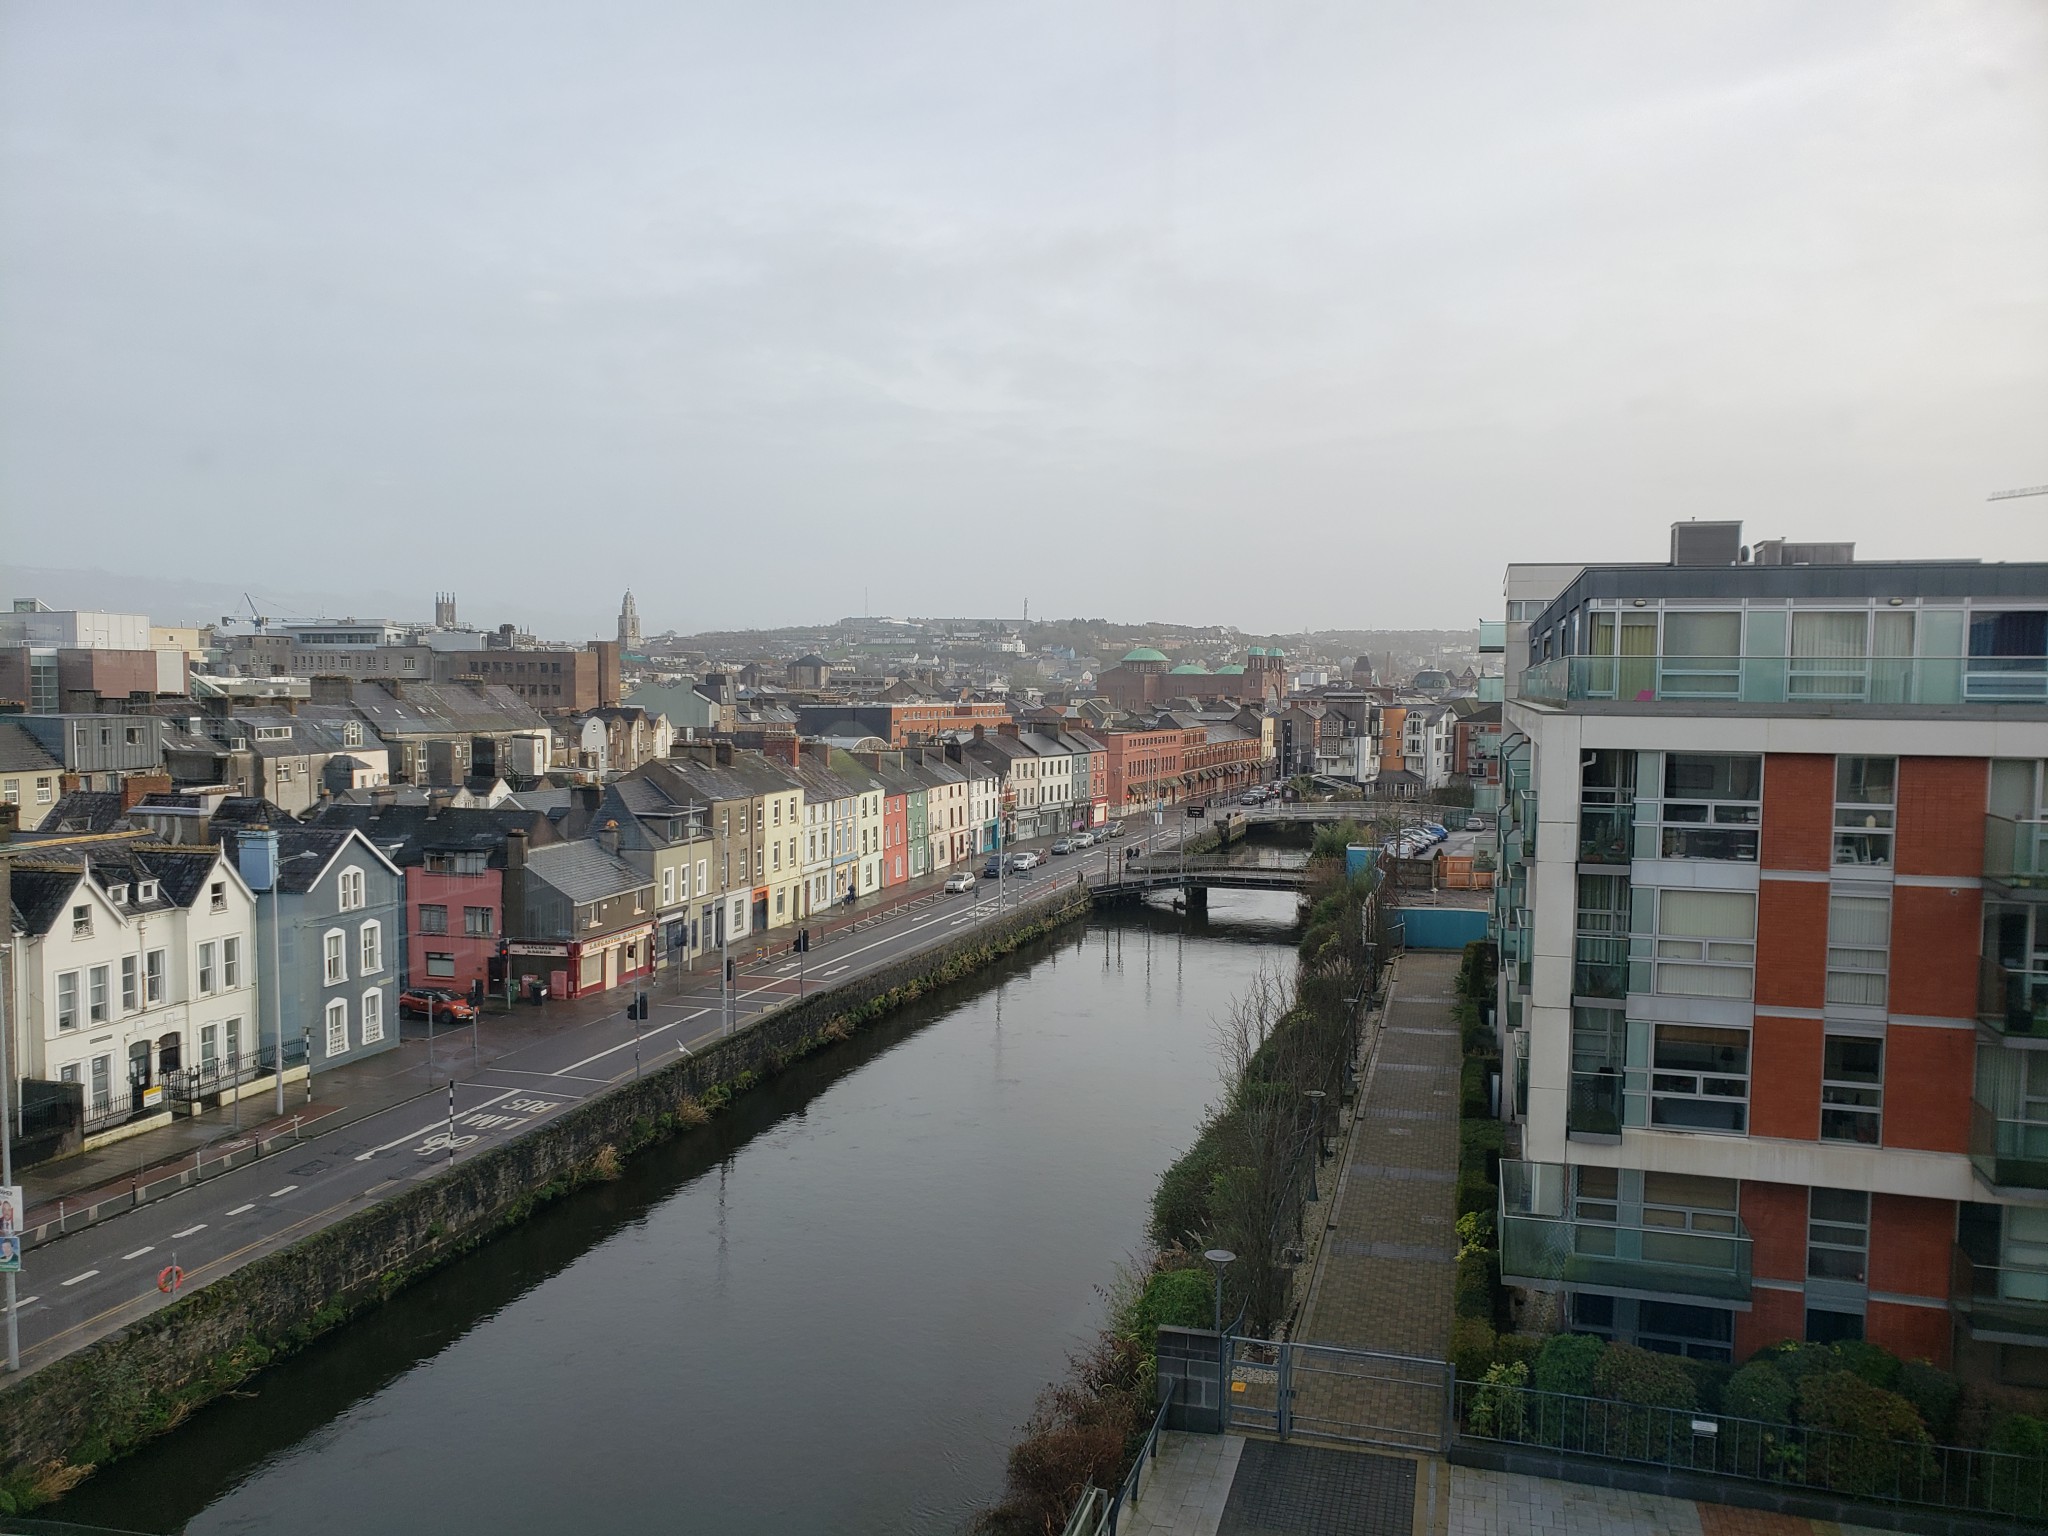 Cork Day 2 – 2/1/2020 – Heathrow, Perfectionist’s Cafe, and Cork